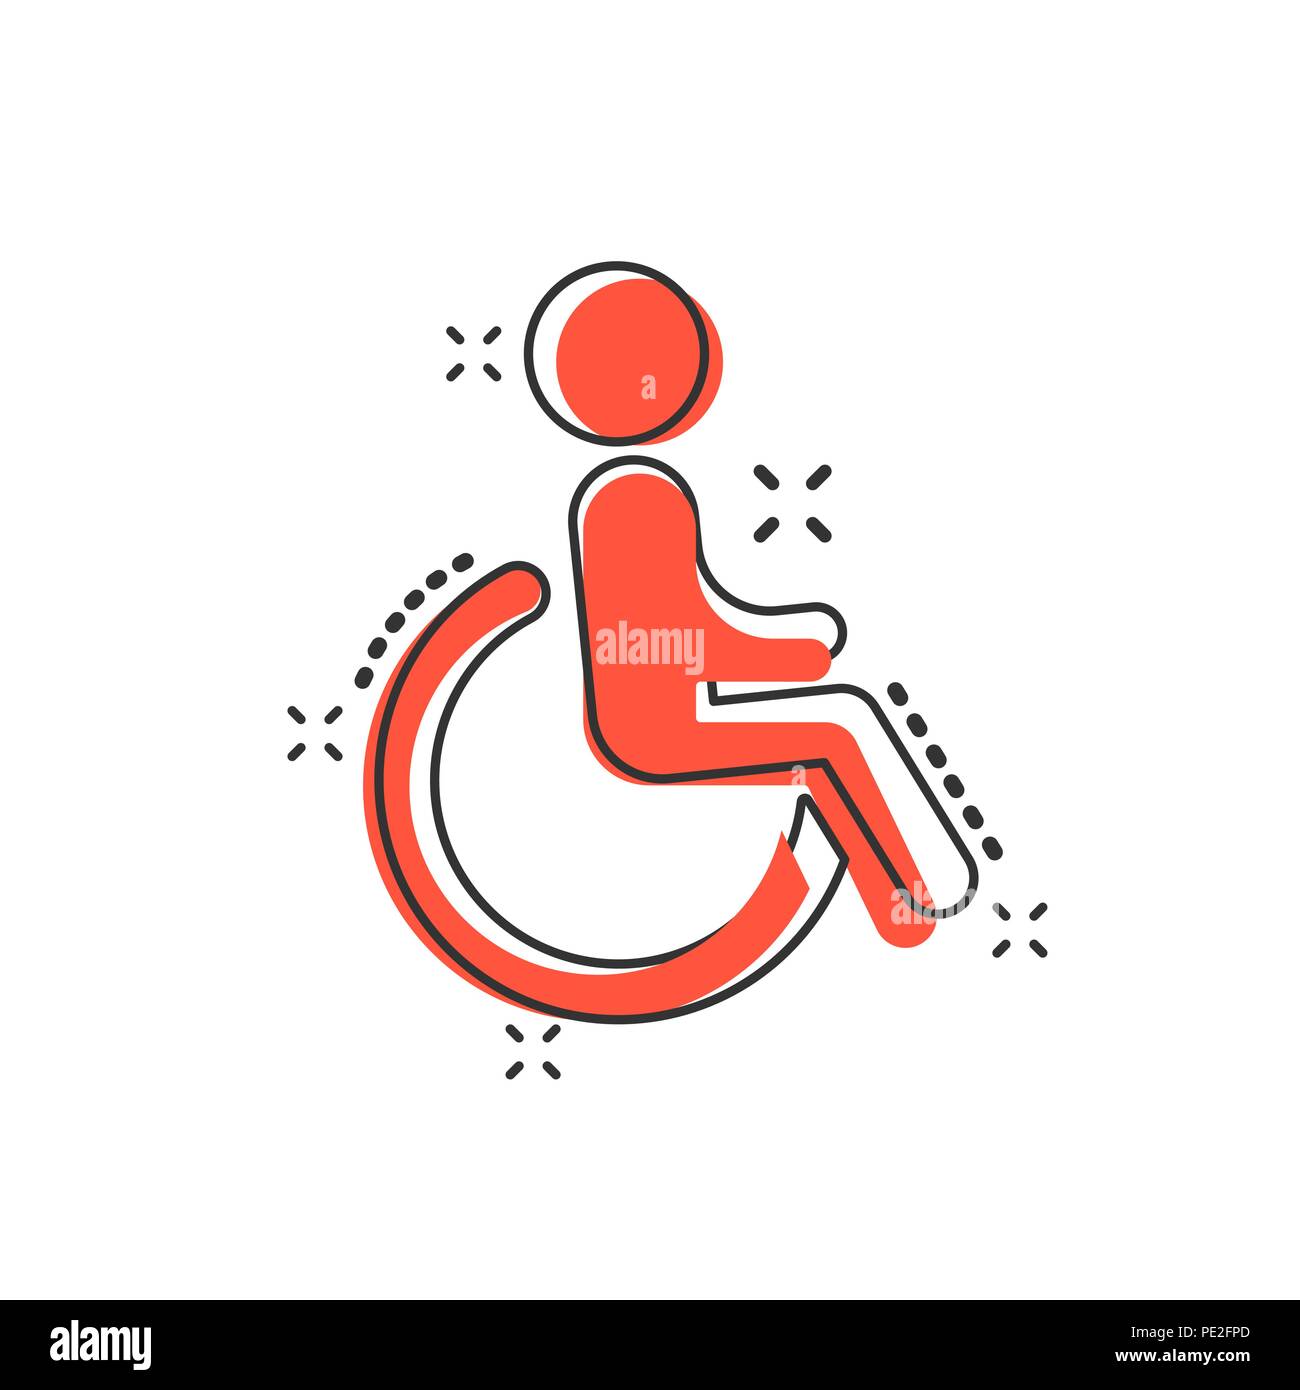 Vector cartoon man in wheelchair icon in comic style. Handicapped invalid sign illustration pictogram. People business splash effect concept. Stock Vector